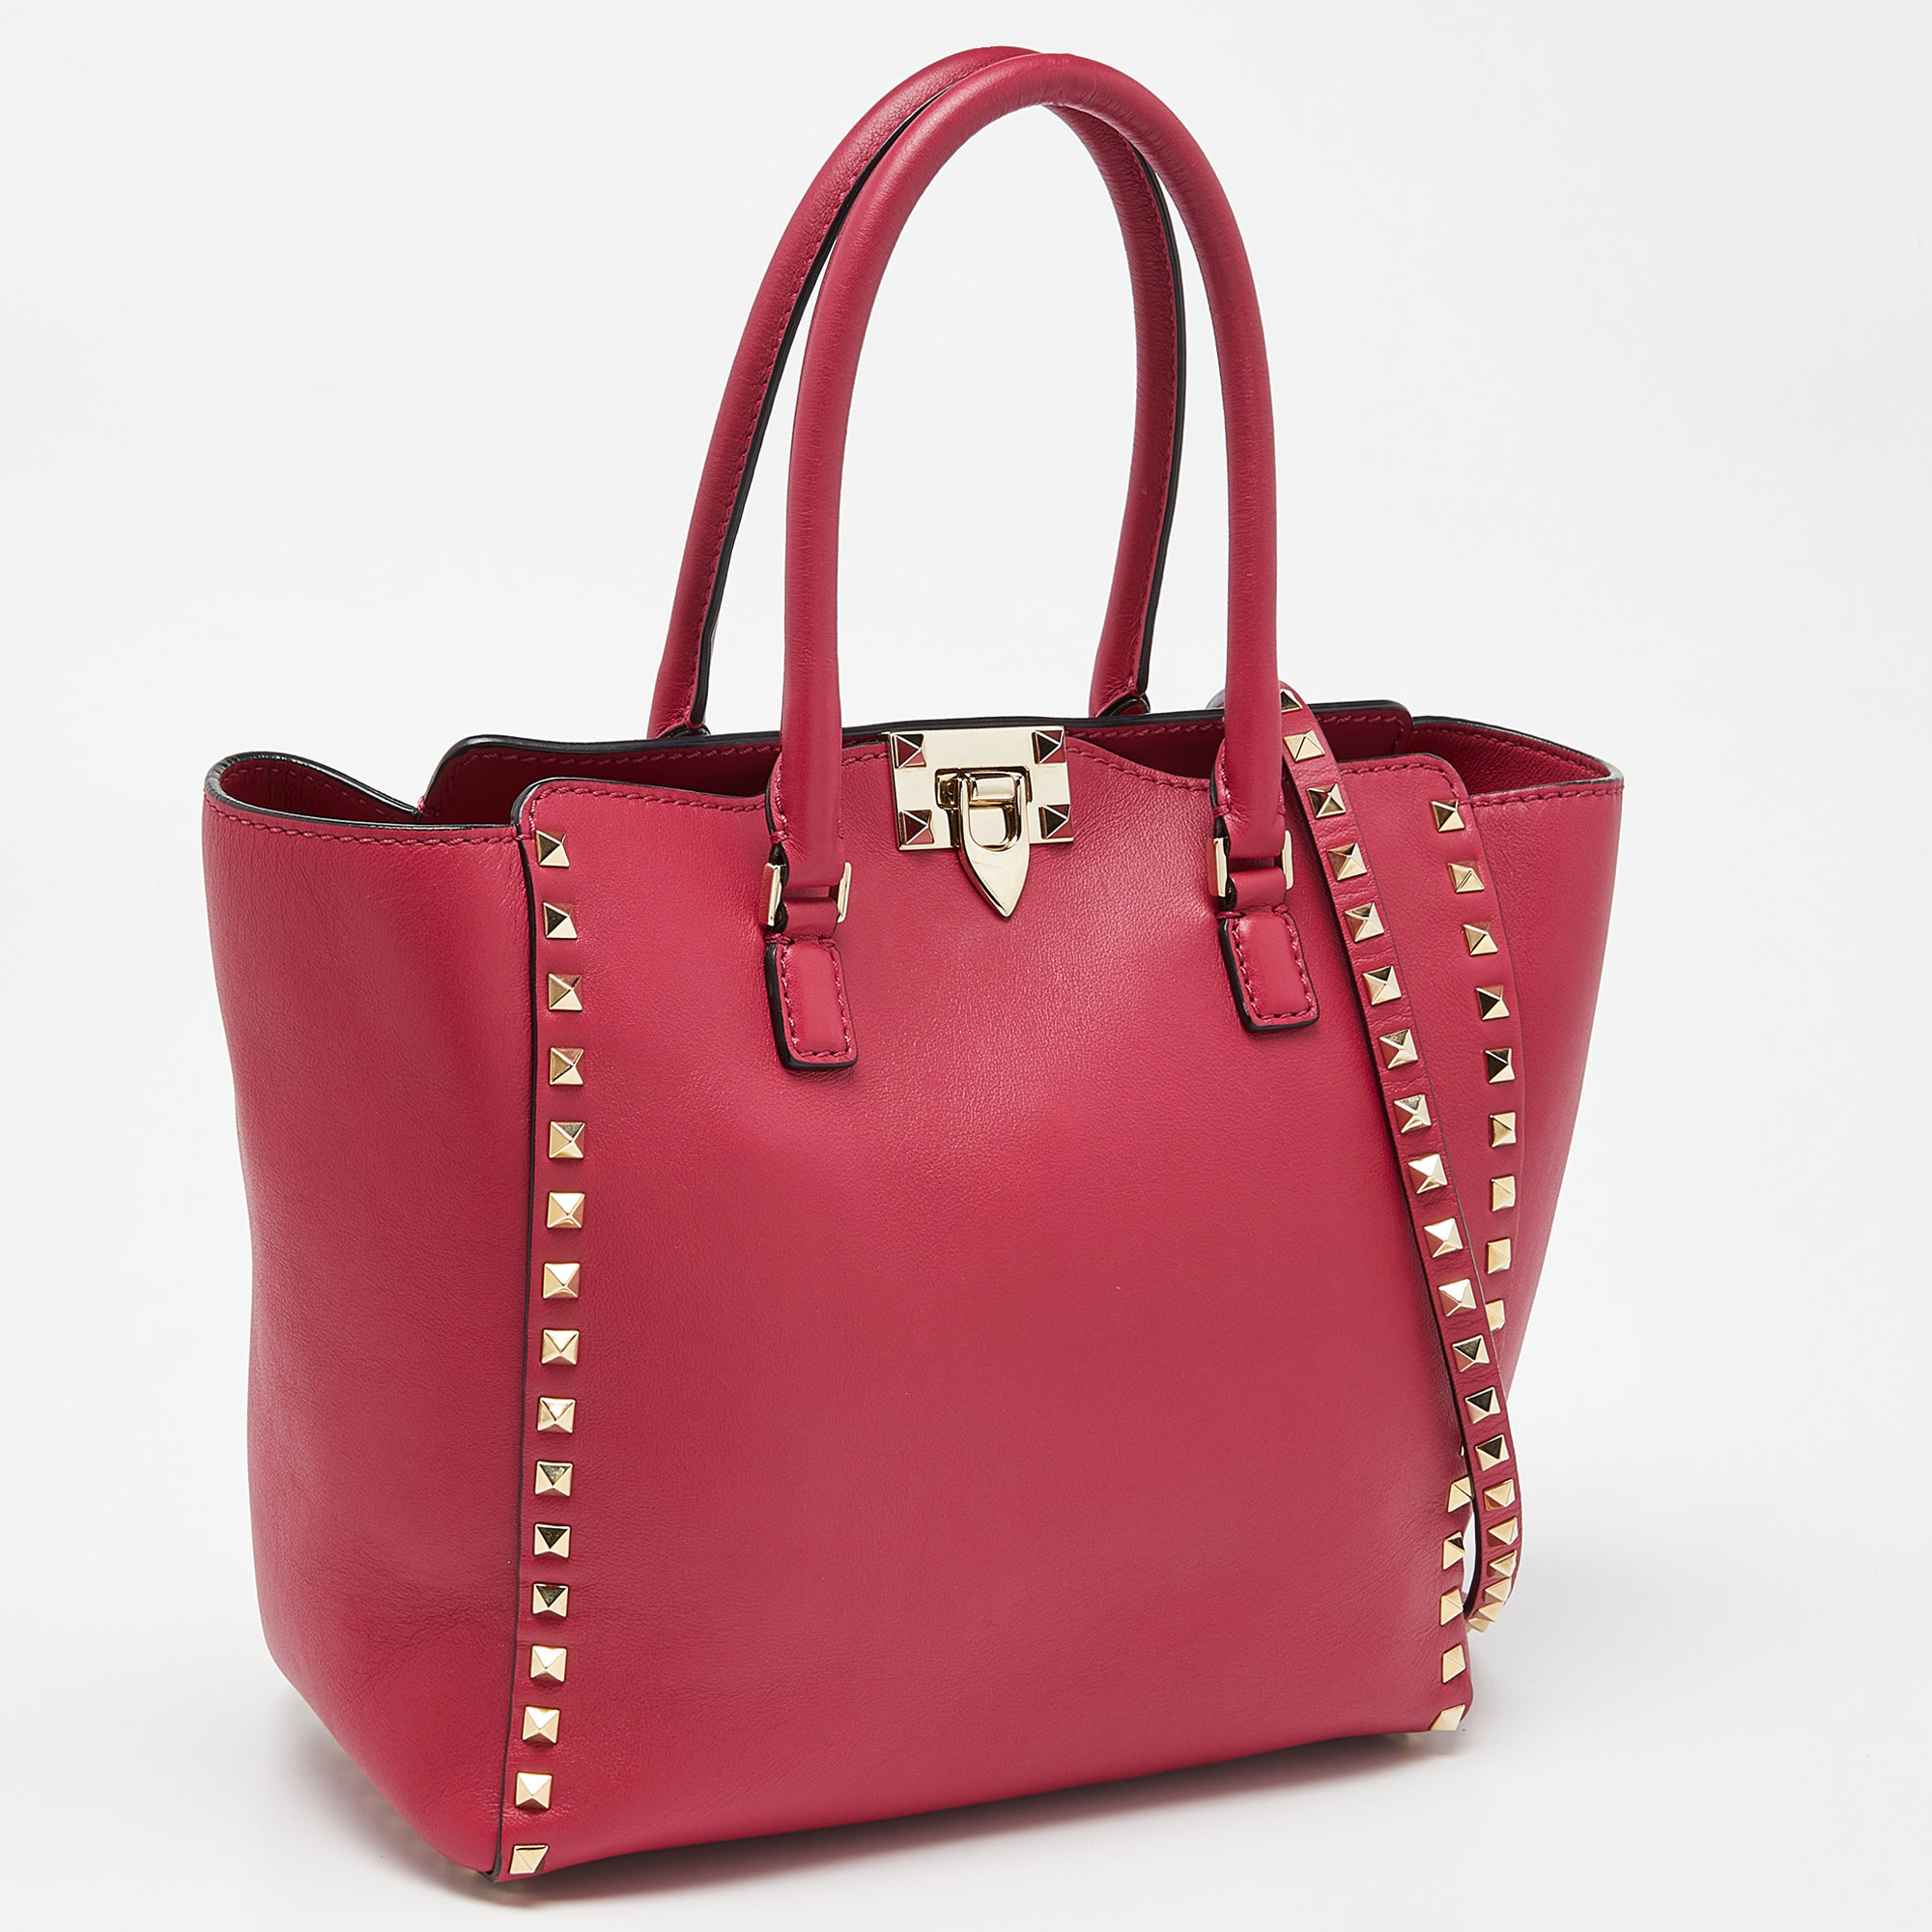 Valentino Pink Leather Rockstud Trapeze Tote